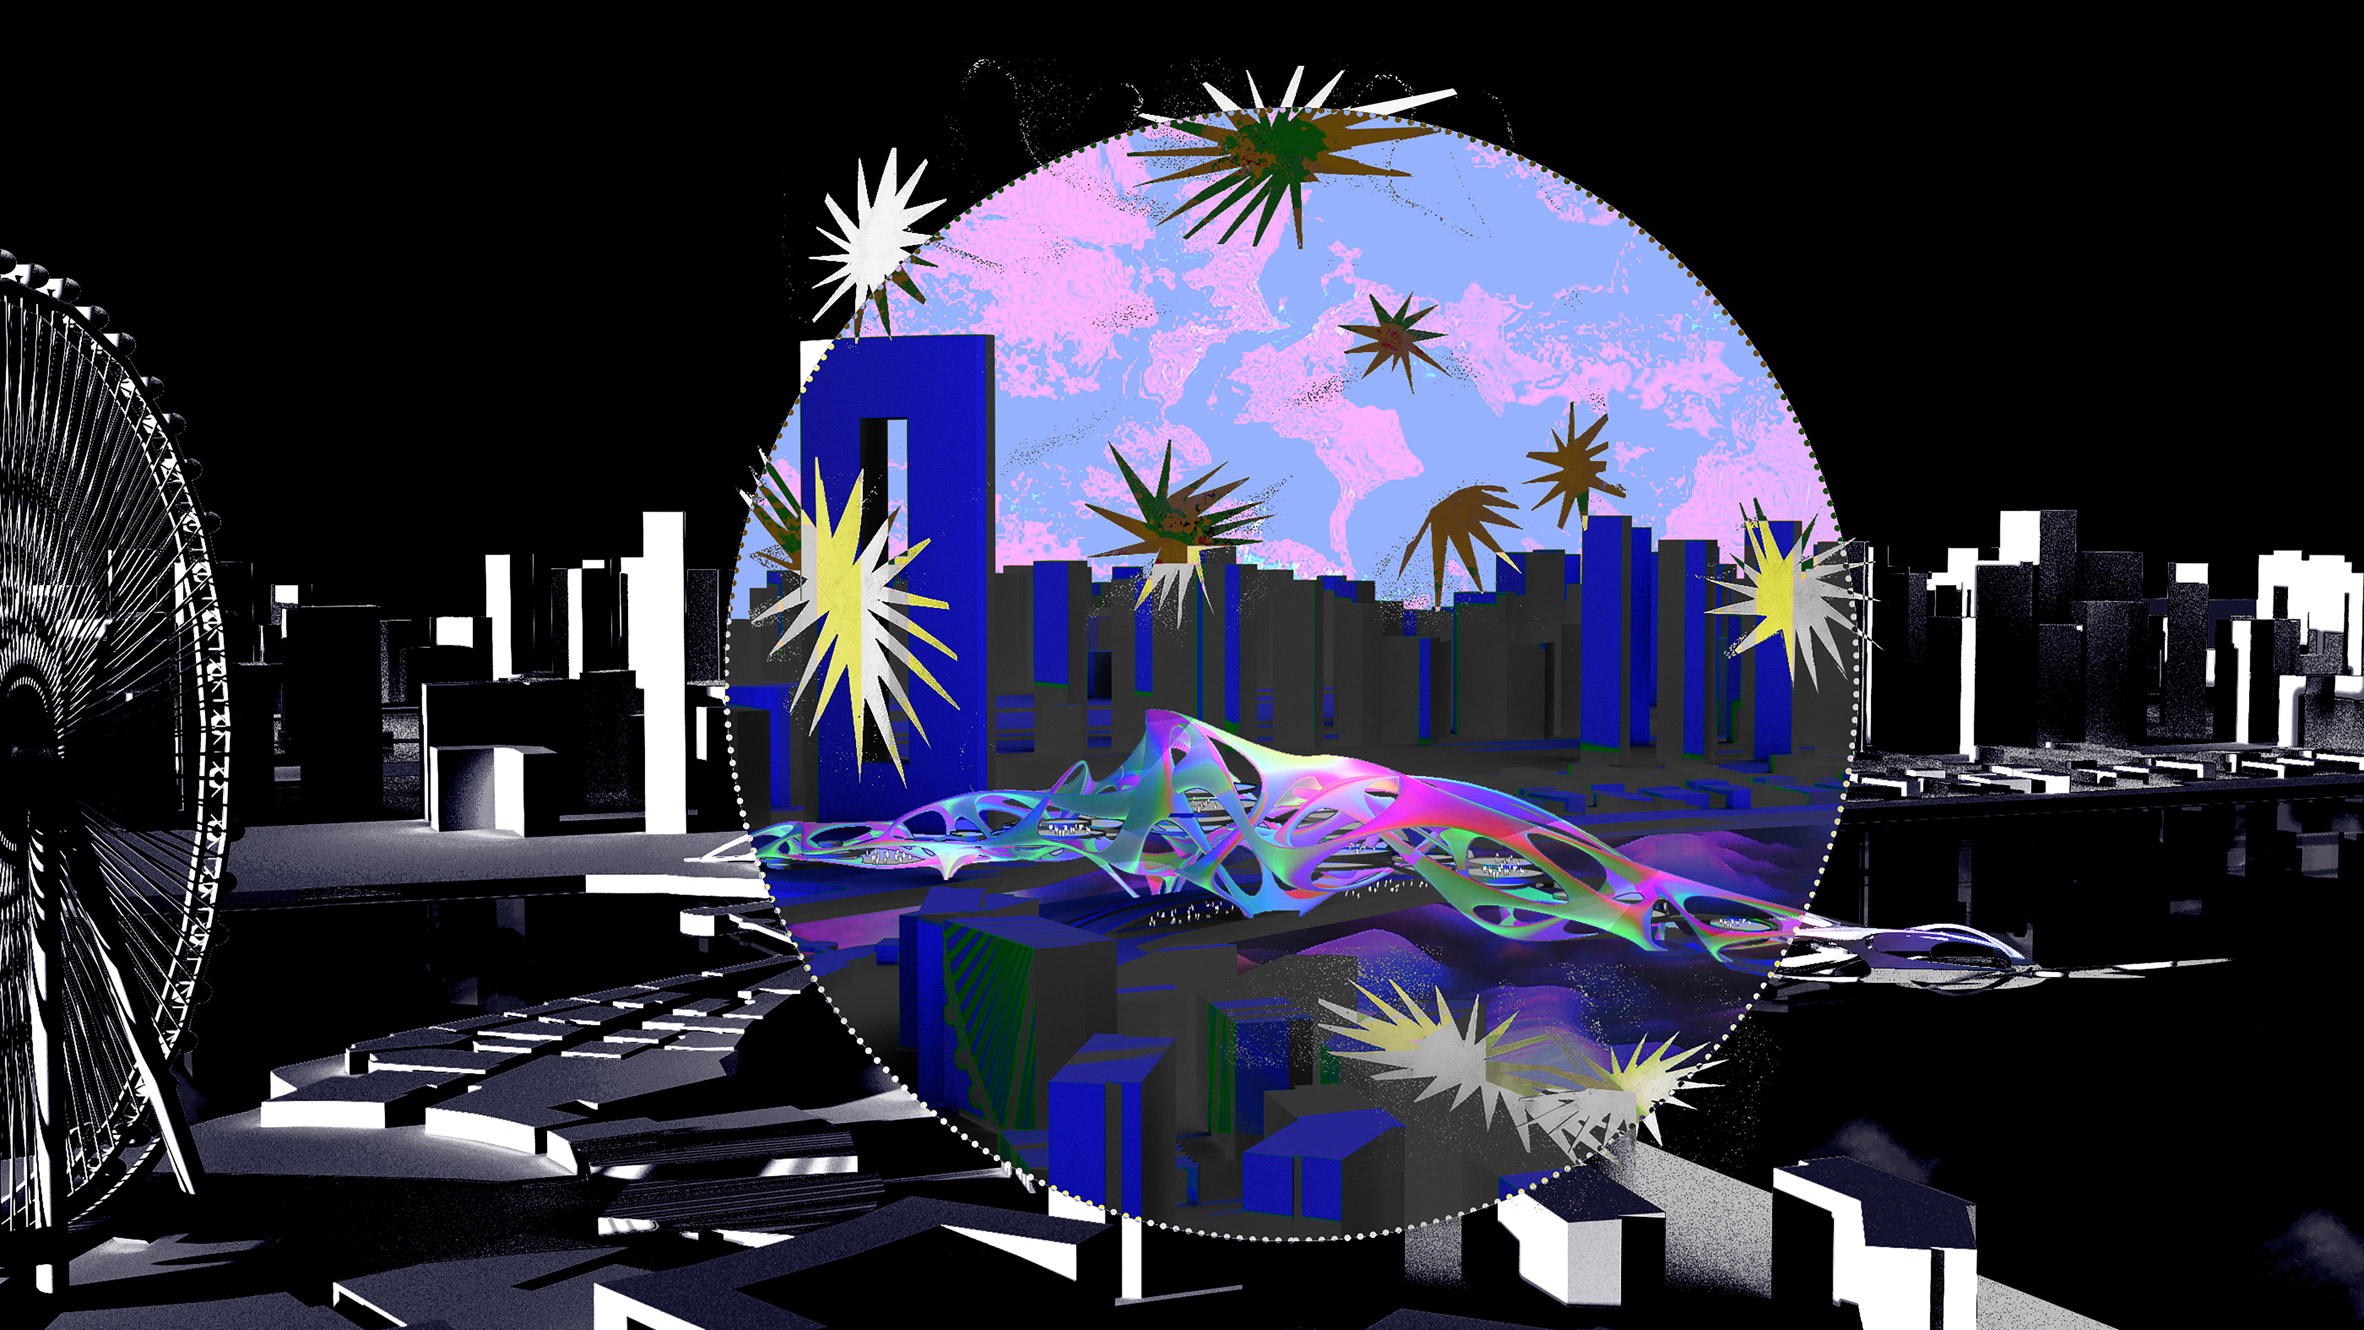 3D model of a city landscape in black and white with a colourful circle overlay in the centre